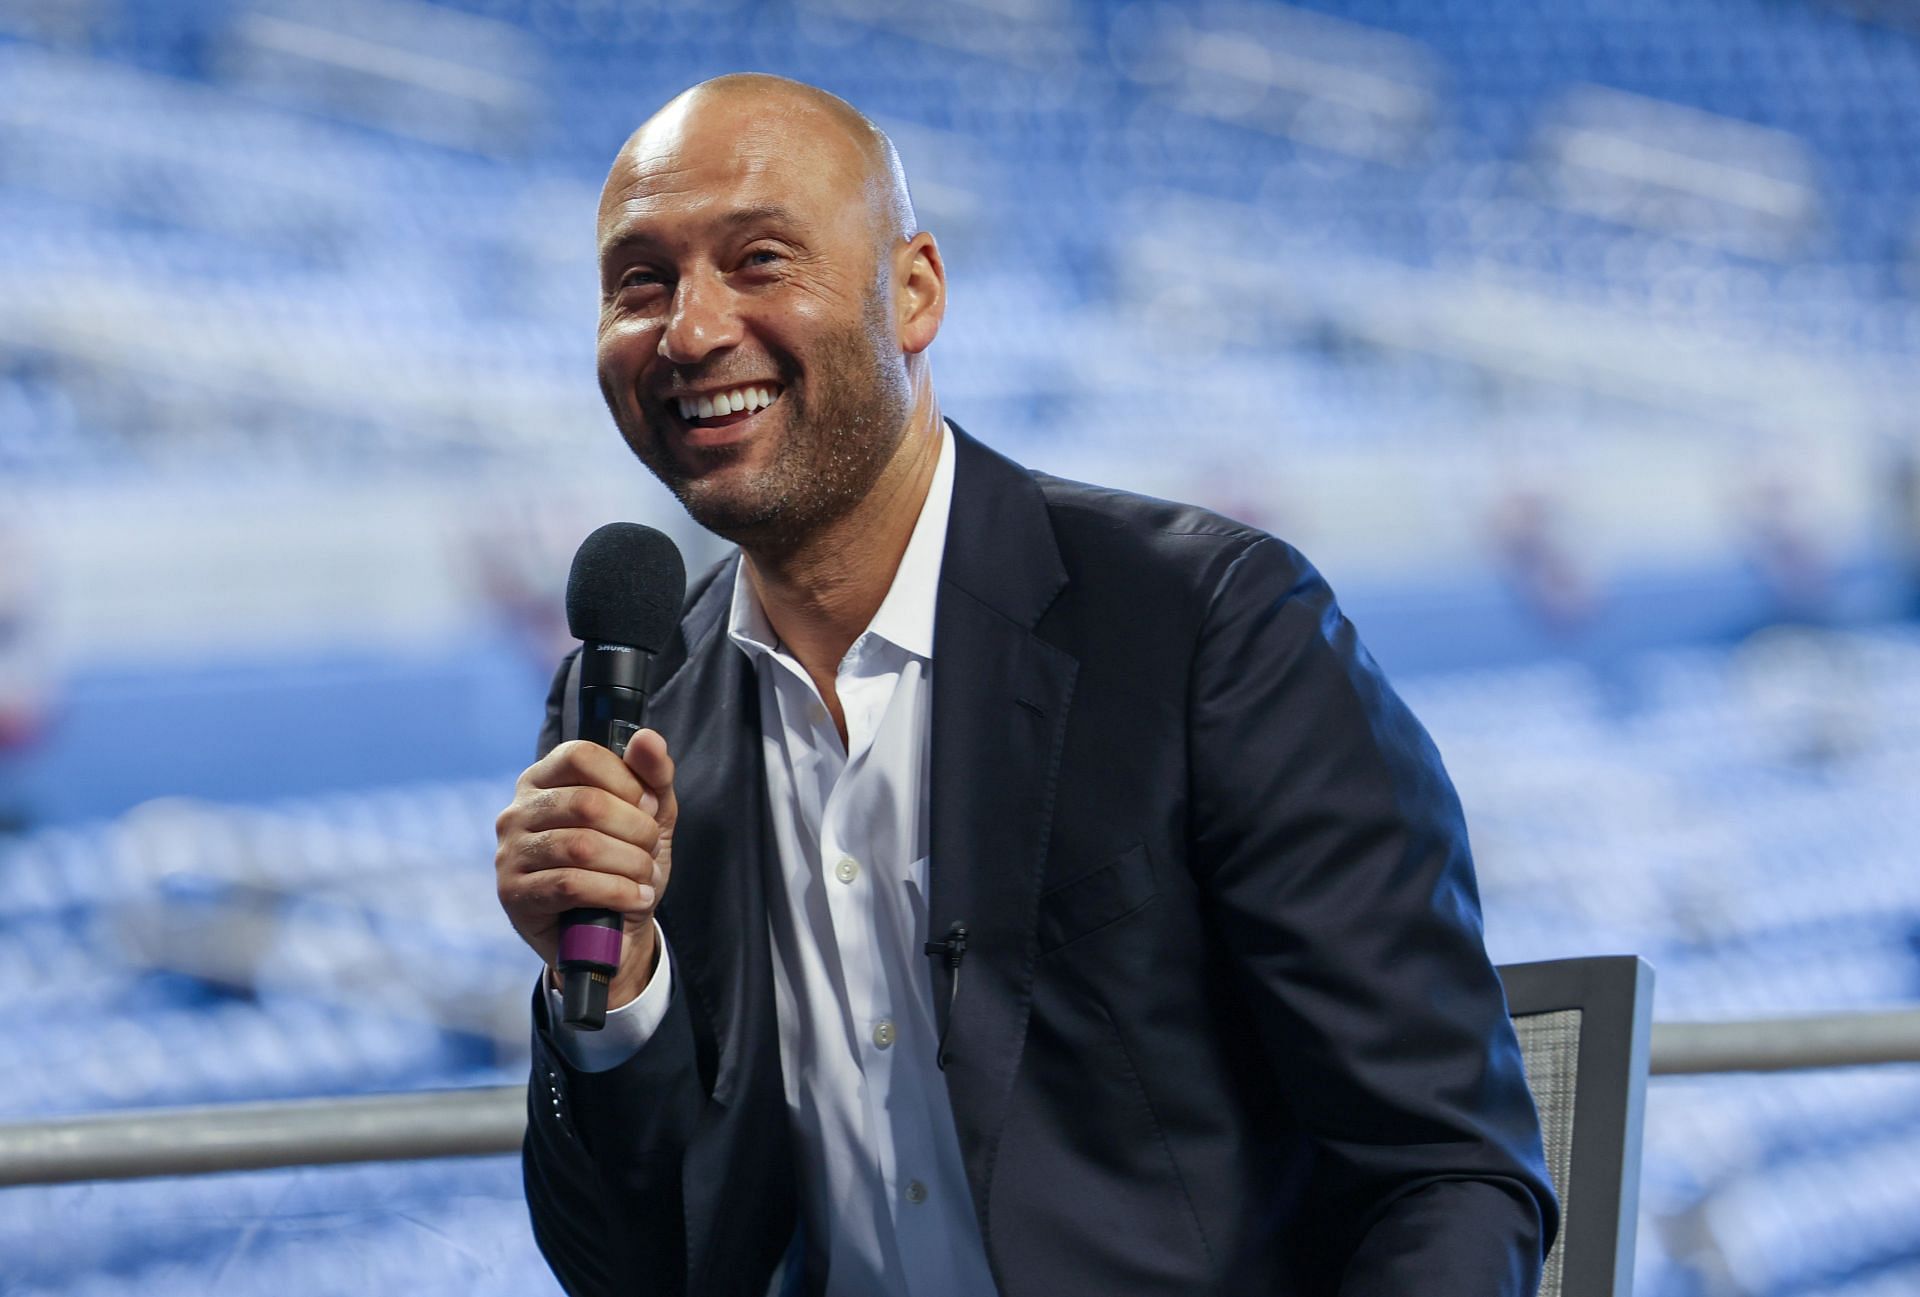 CEO of the Miami Marlins Derek Jeter speaks to the media to announce loanDepot as the exclusive naming rights partner for loanDepot park, formerly known as Marlins Park, on March 31, 2021 in Miami, Florida